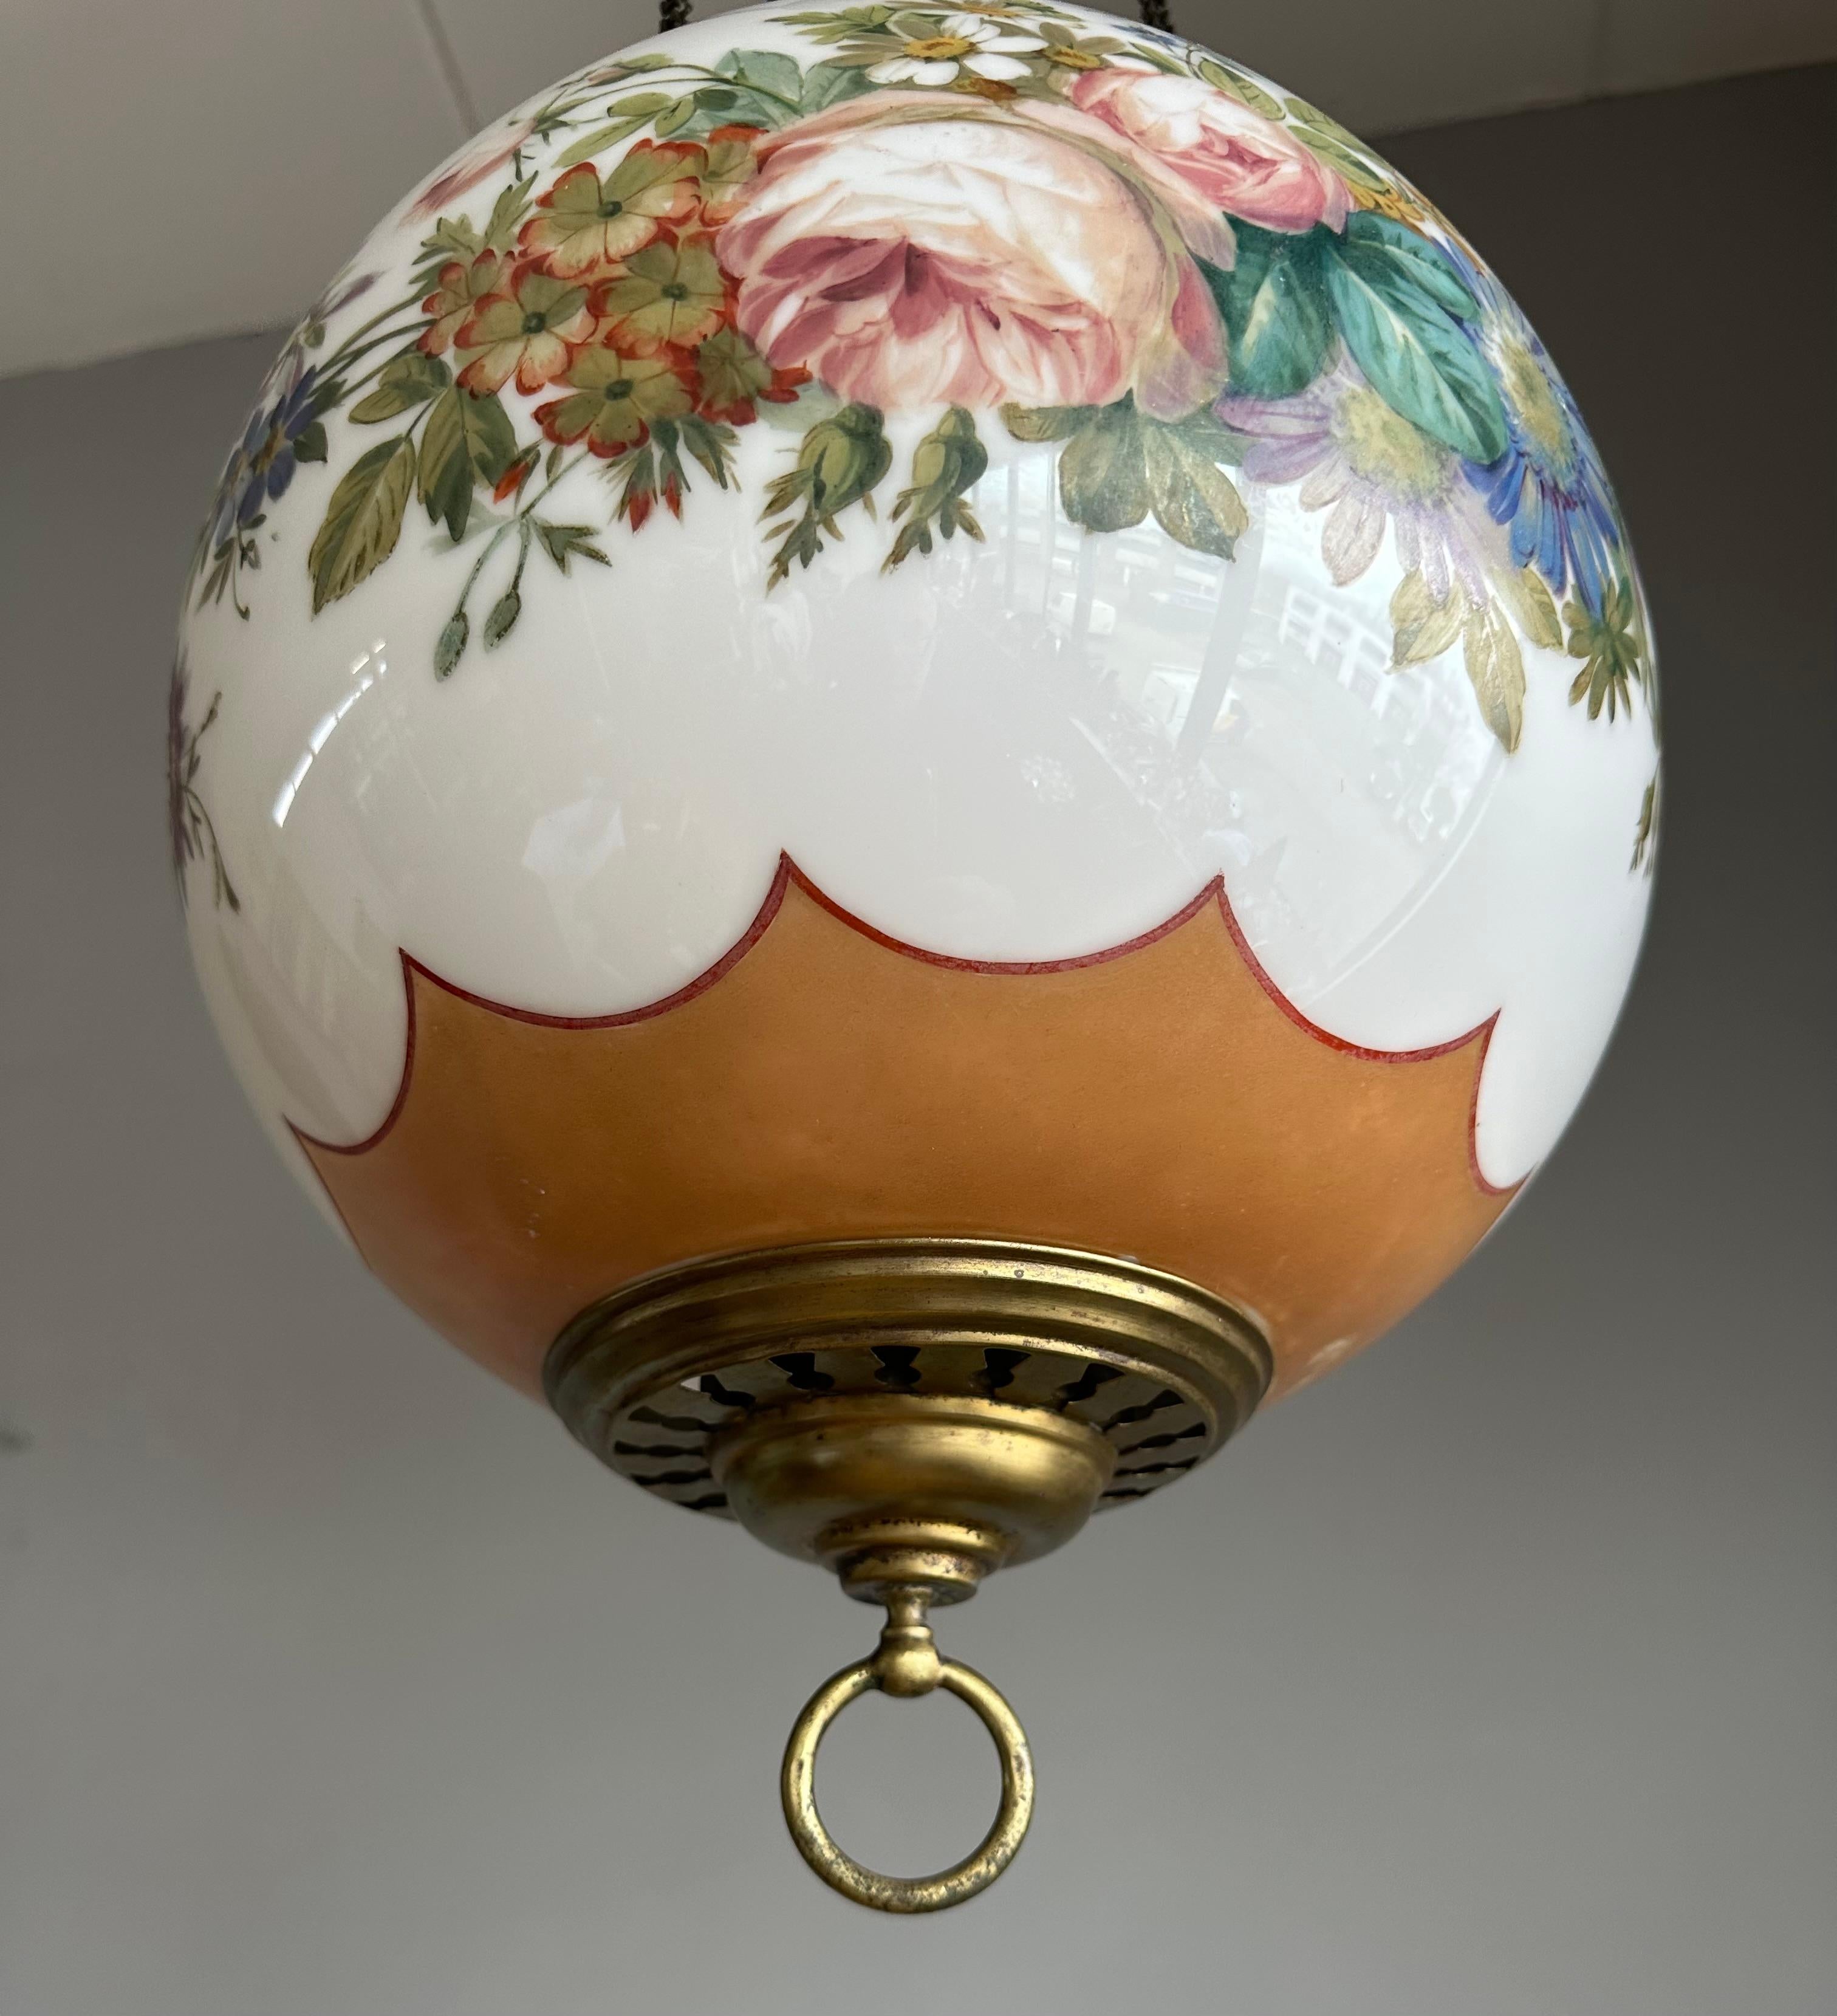 Cast Antique Round Opaline Glass Shade Pendant Light with Wreath of Flowers Decor For Sale